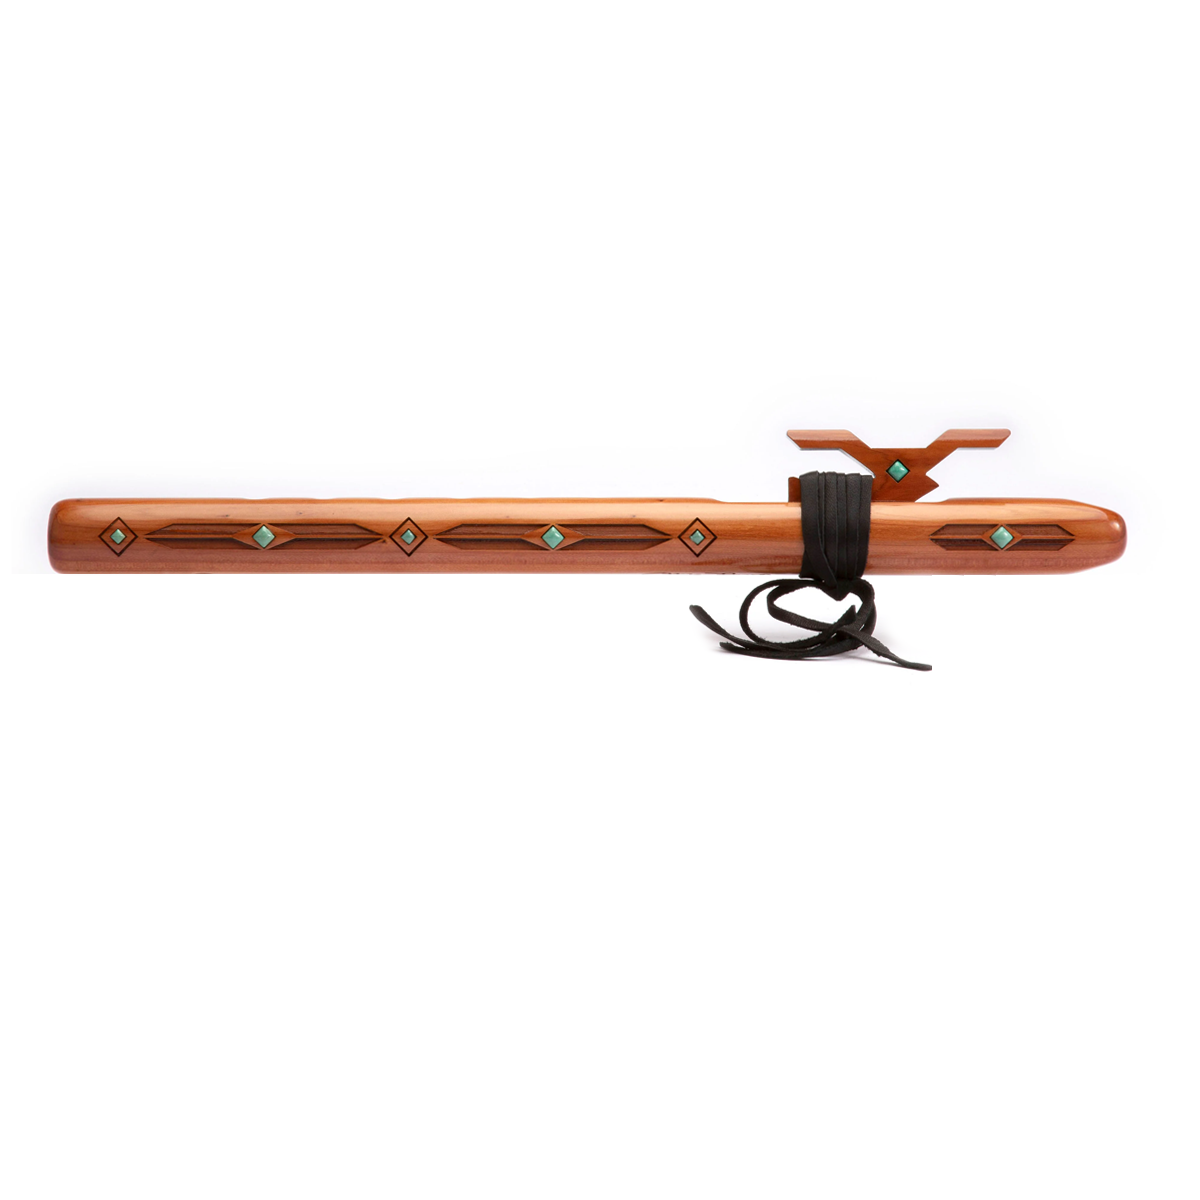 High Spirits Merlin "High C" Flute - Signature - Aromatic Cedar with turquoise Inlay